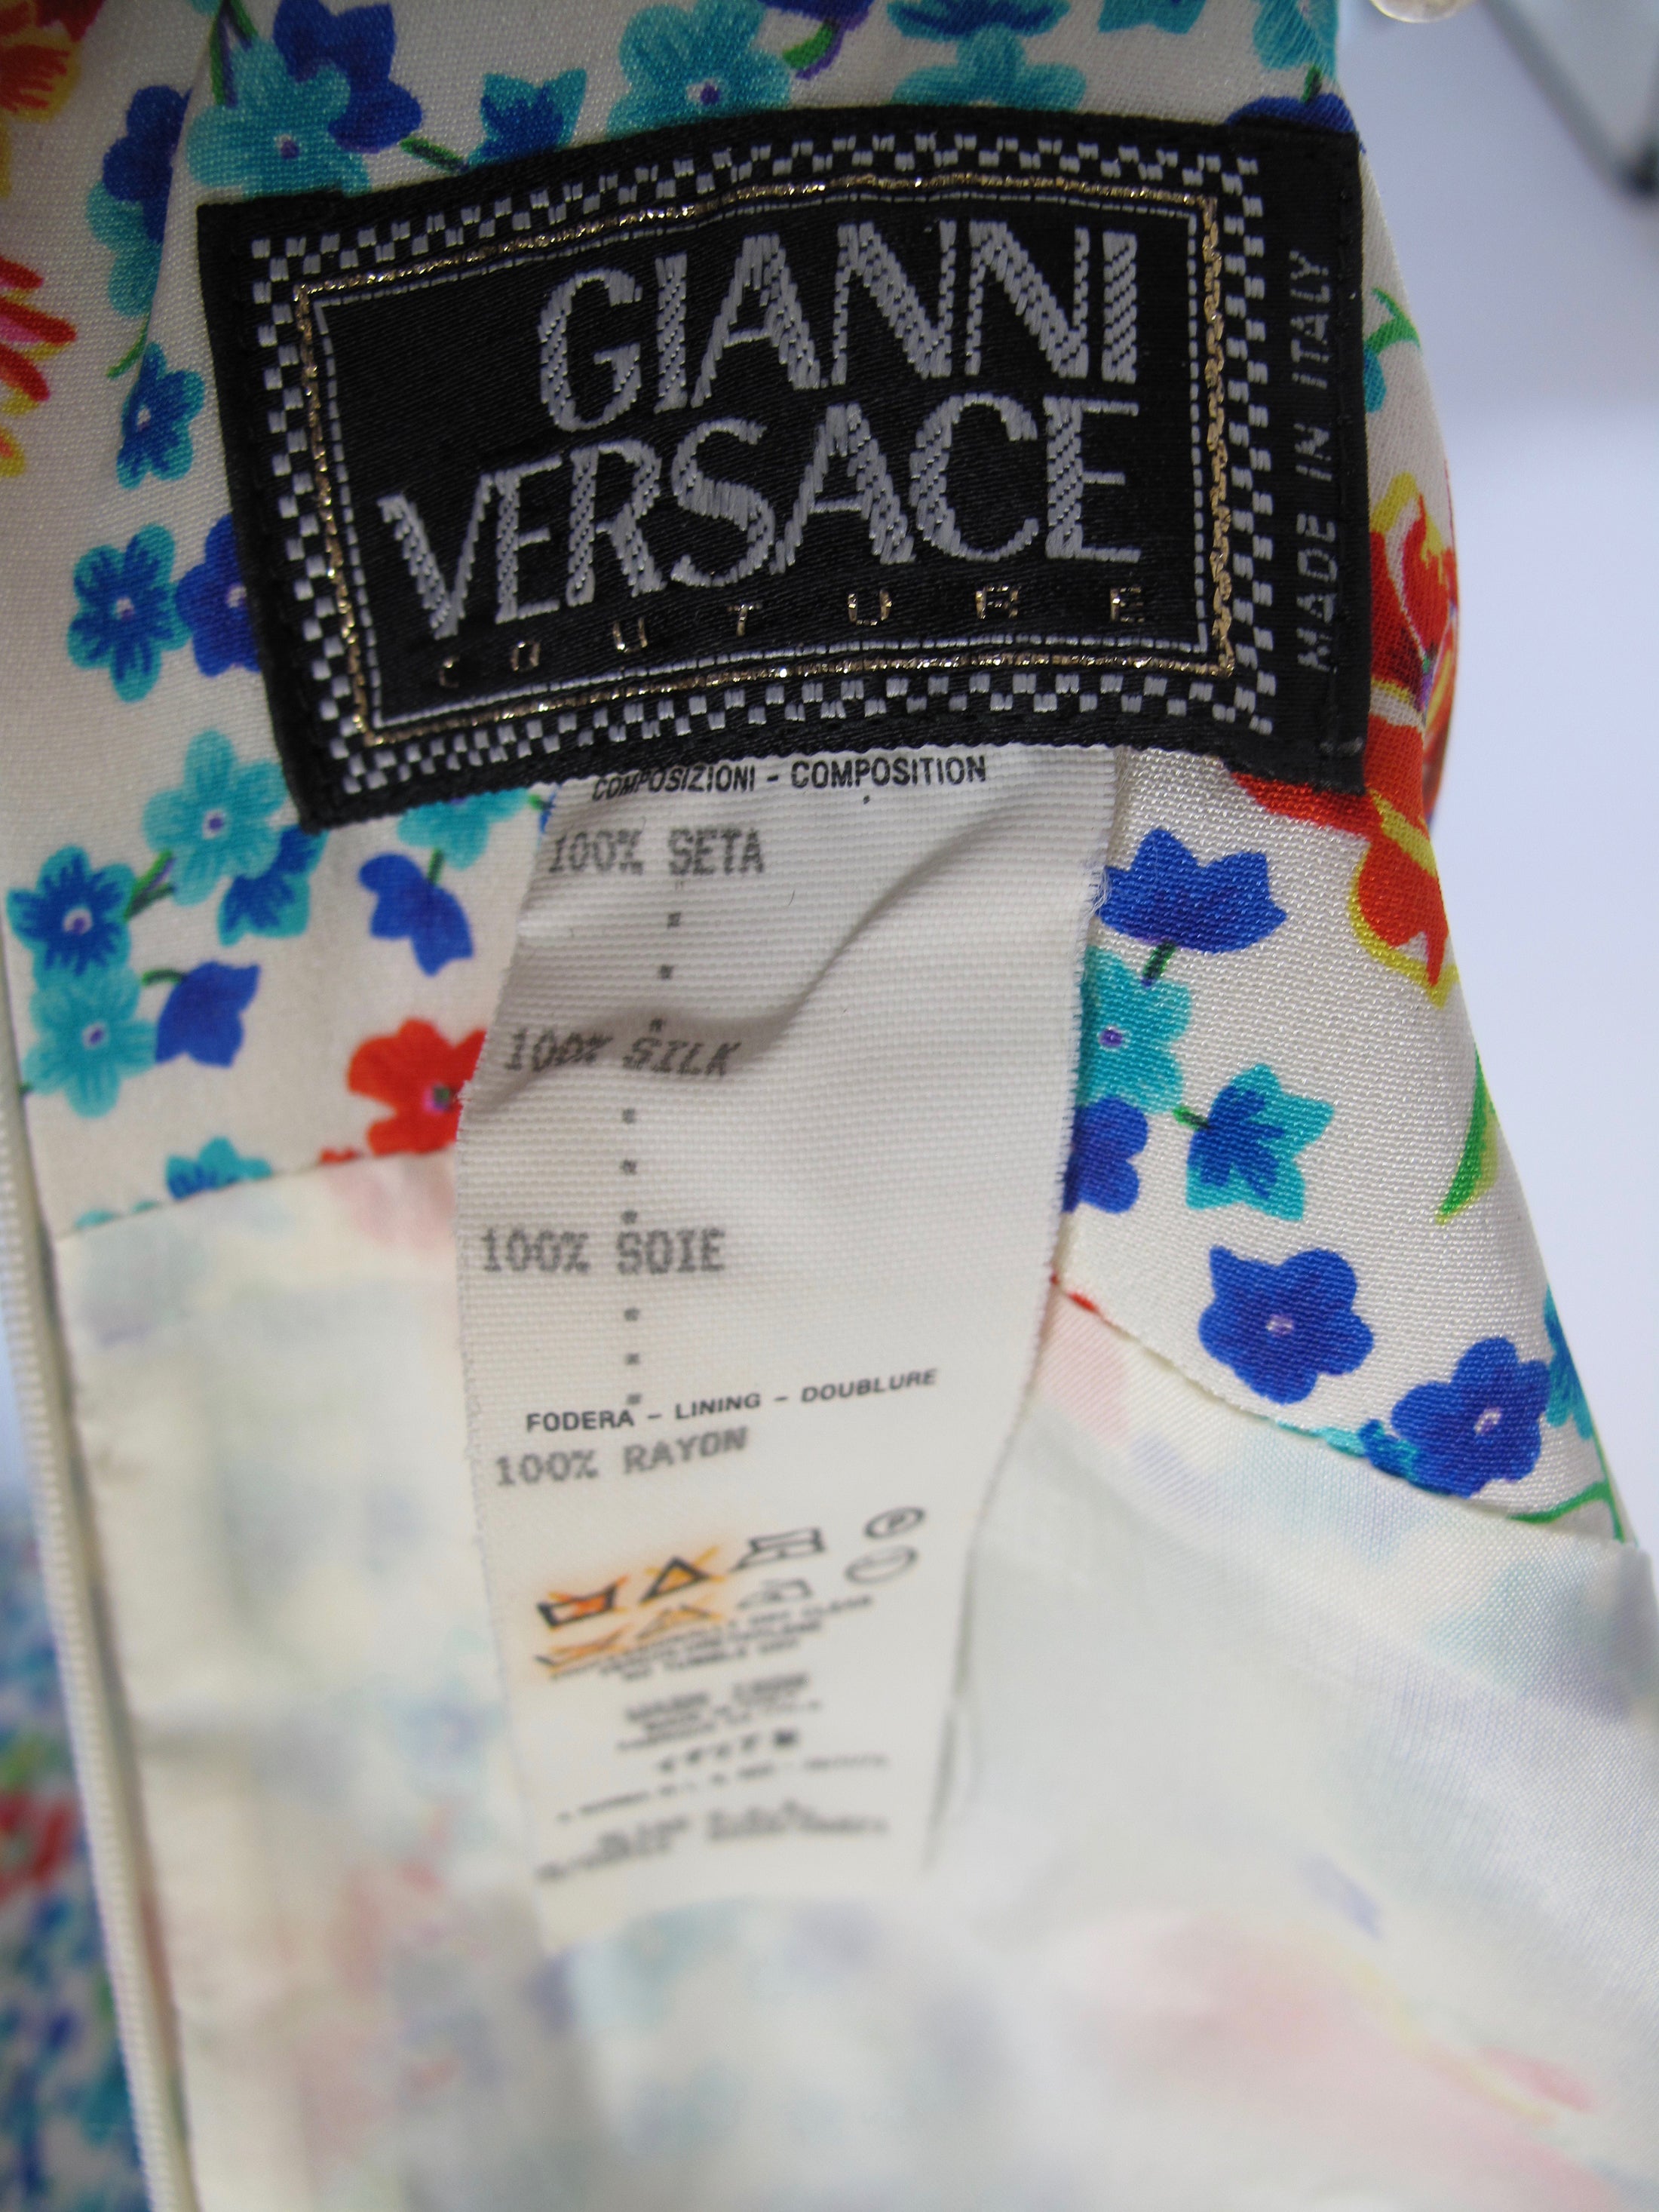 GIANNI VERSACE Floral Dress, 1990s – ARCHIVE